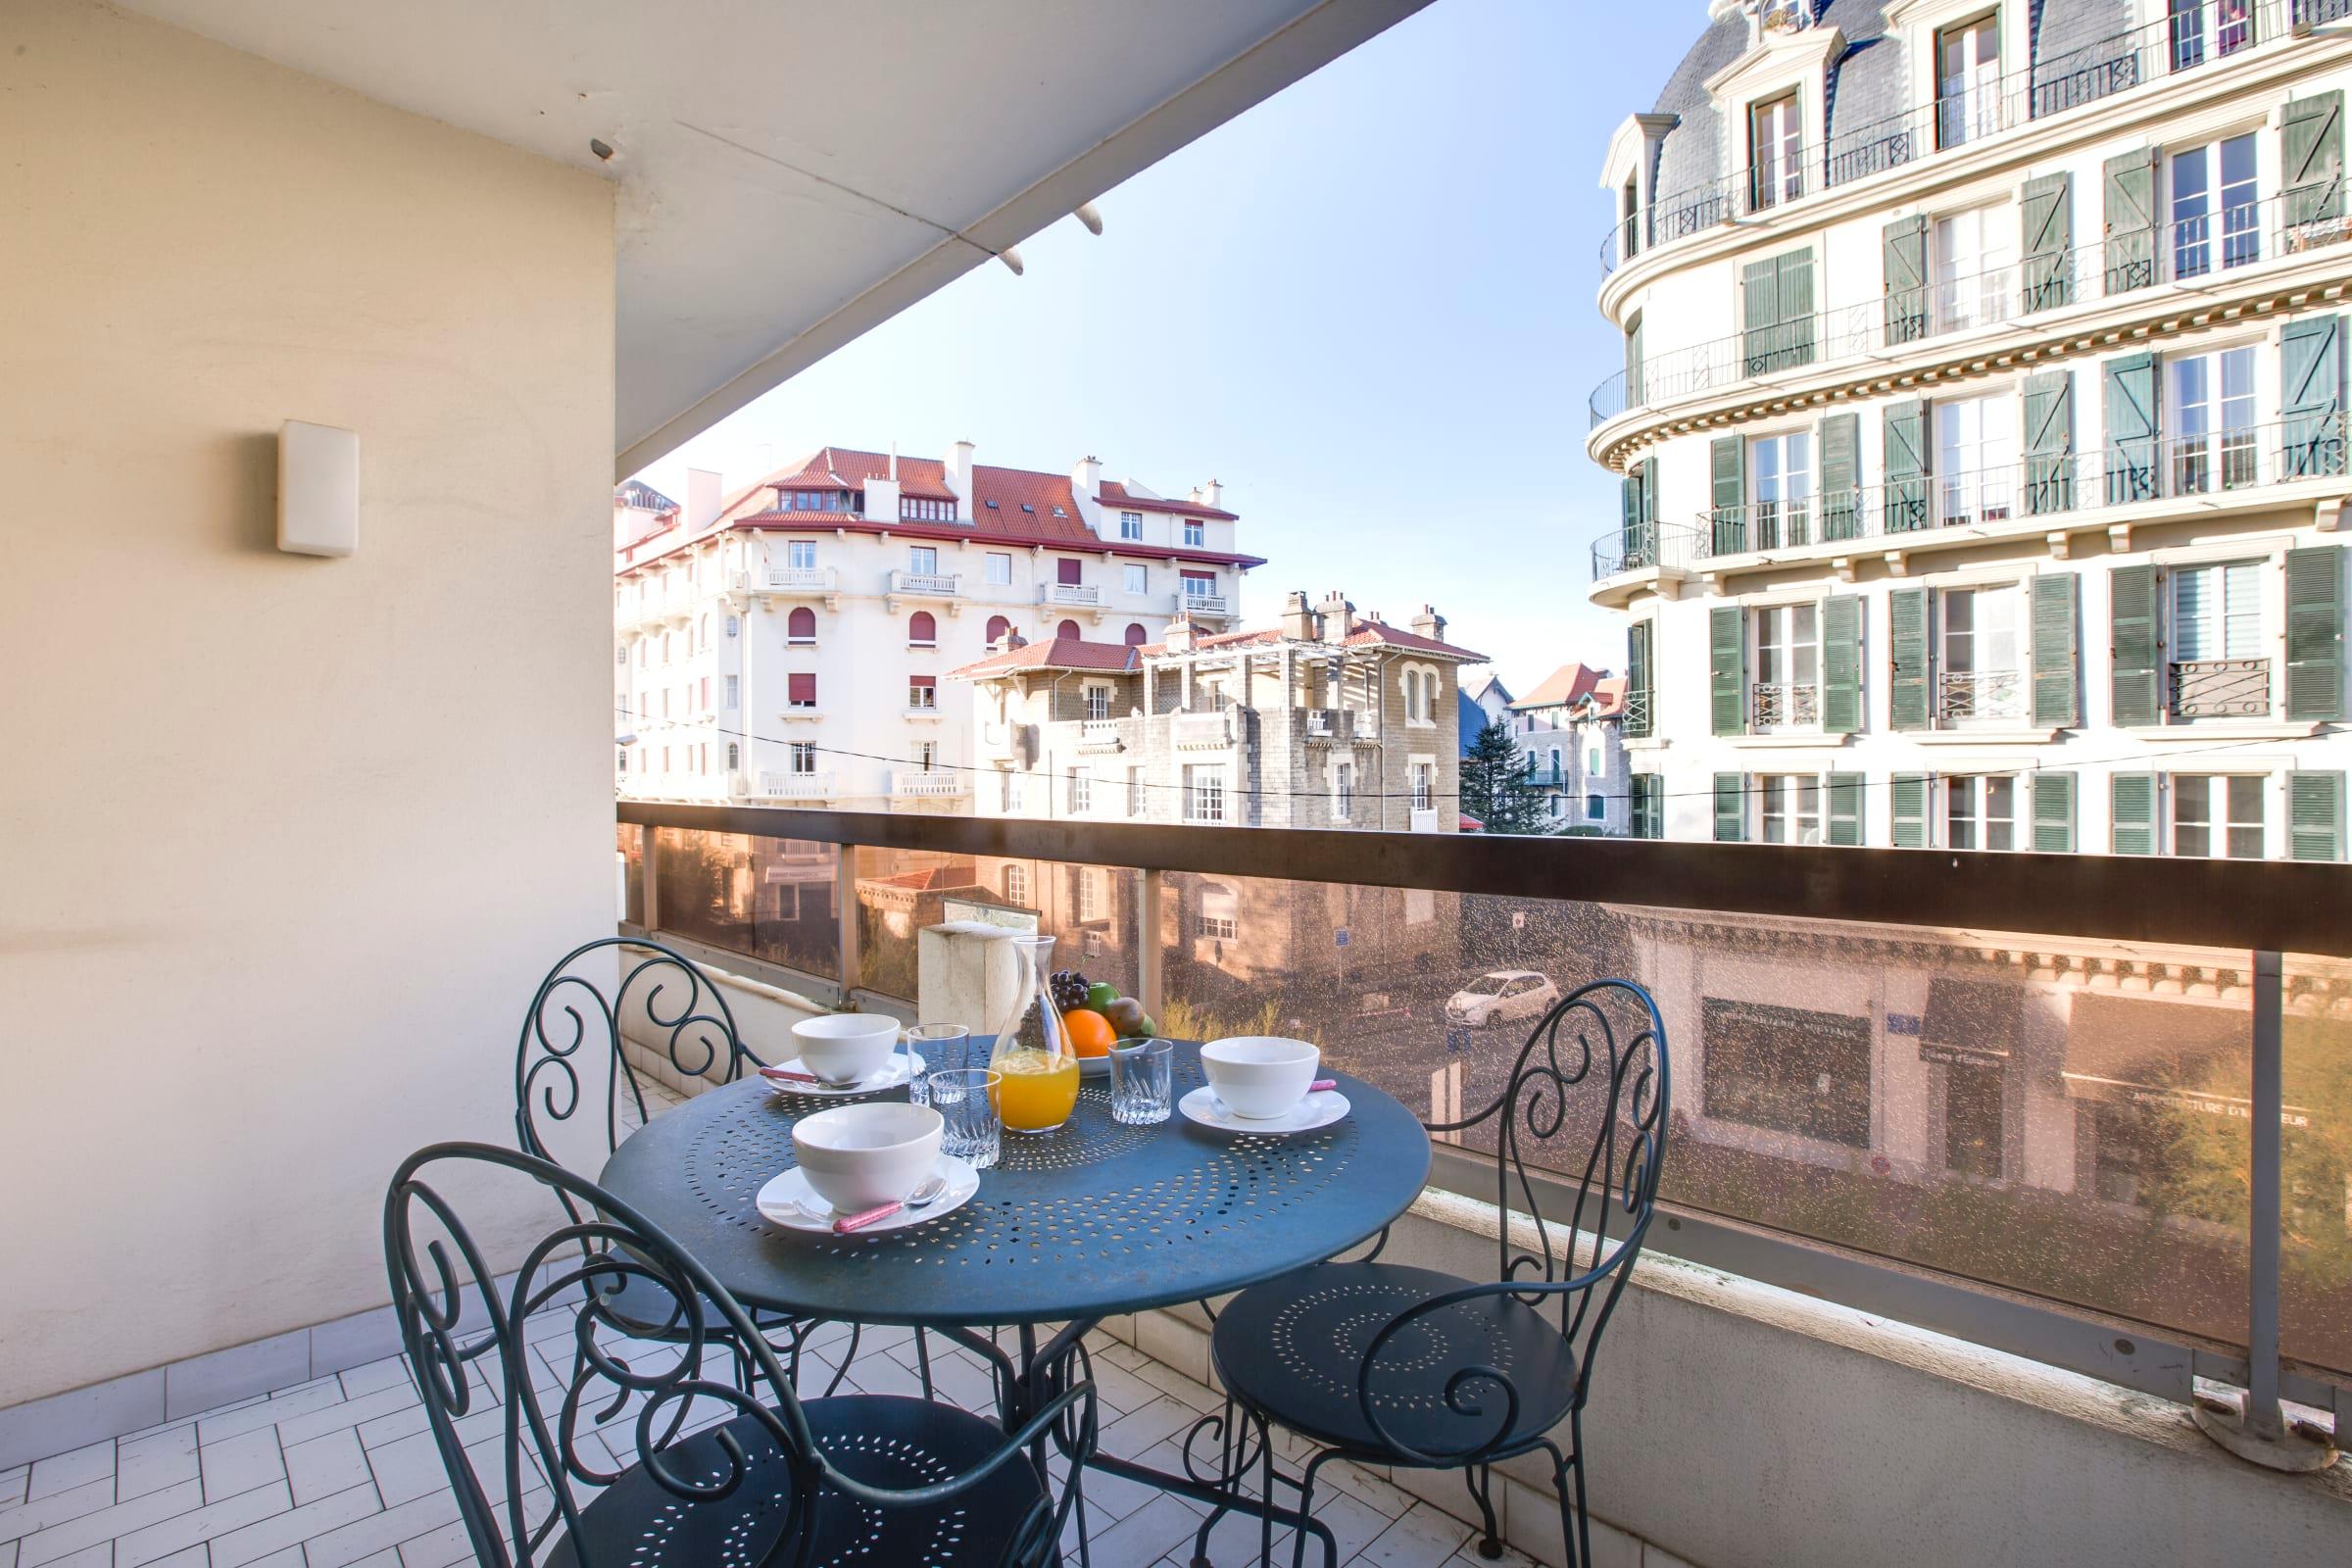 Property Image 1 - Sunny apartment in Biarritz, close to the beach